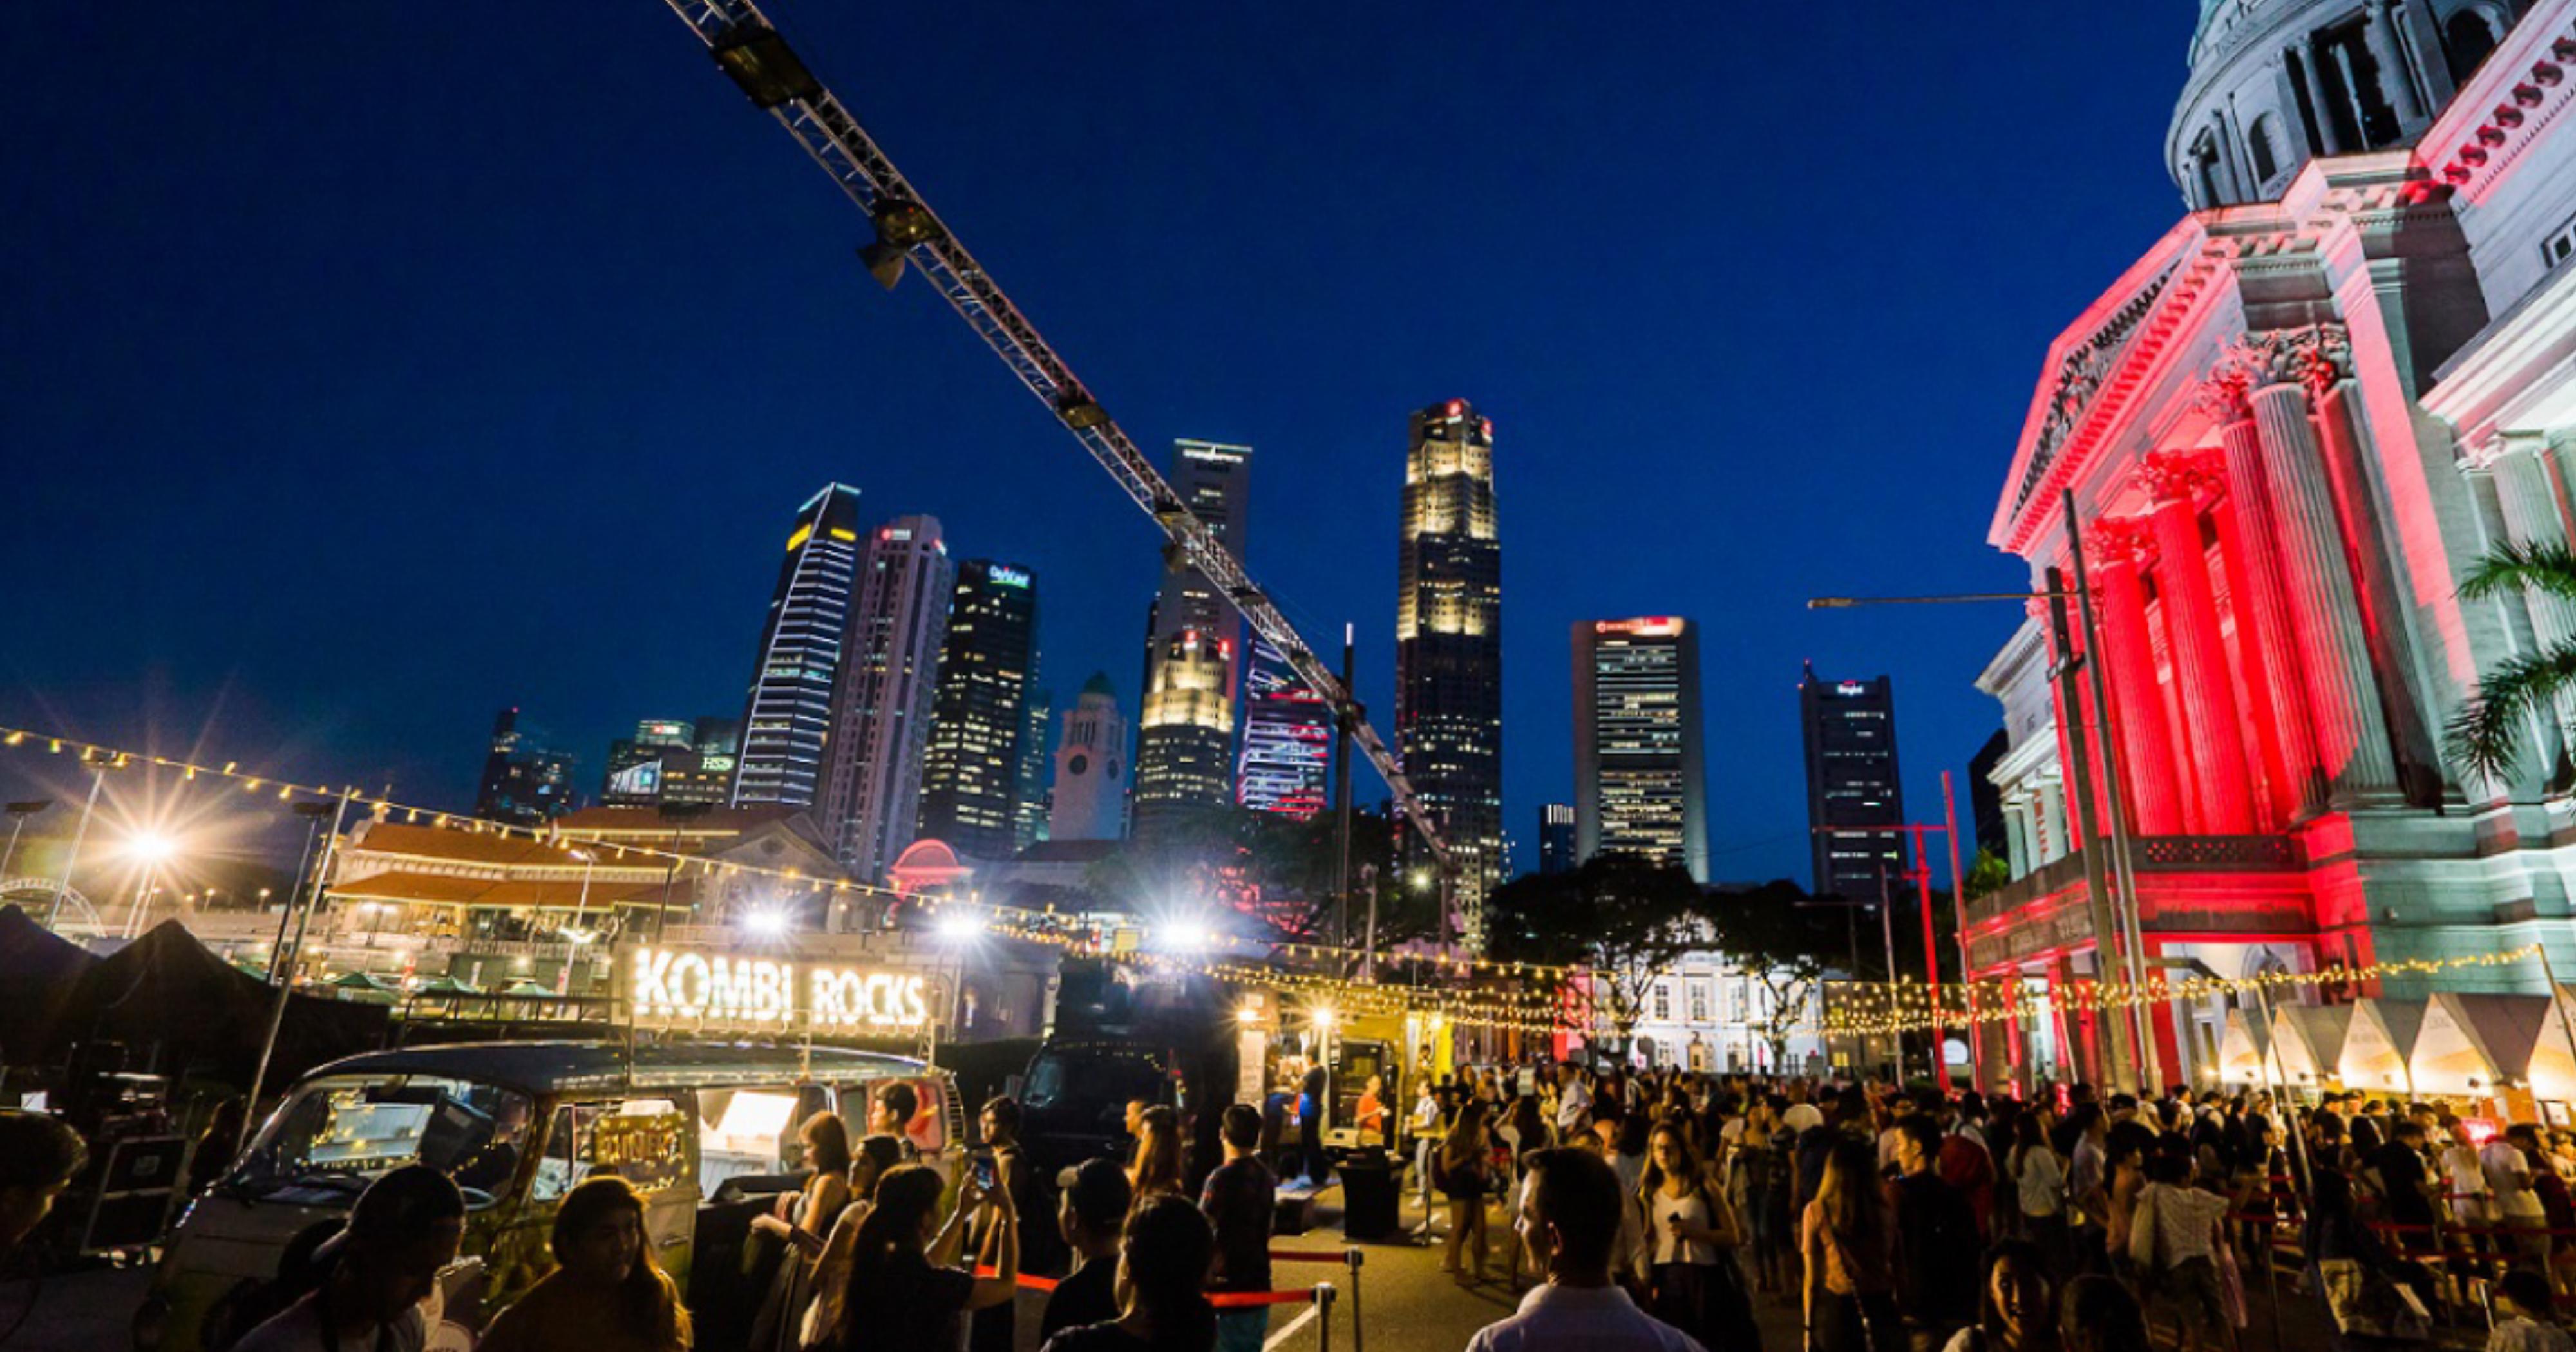 Light to Night Festival with art installations & food street in S’pore